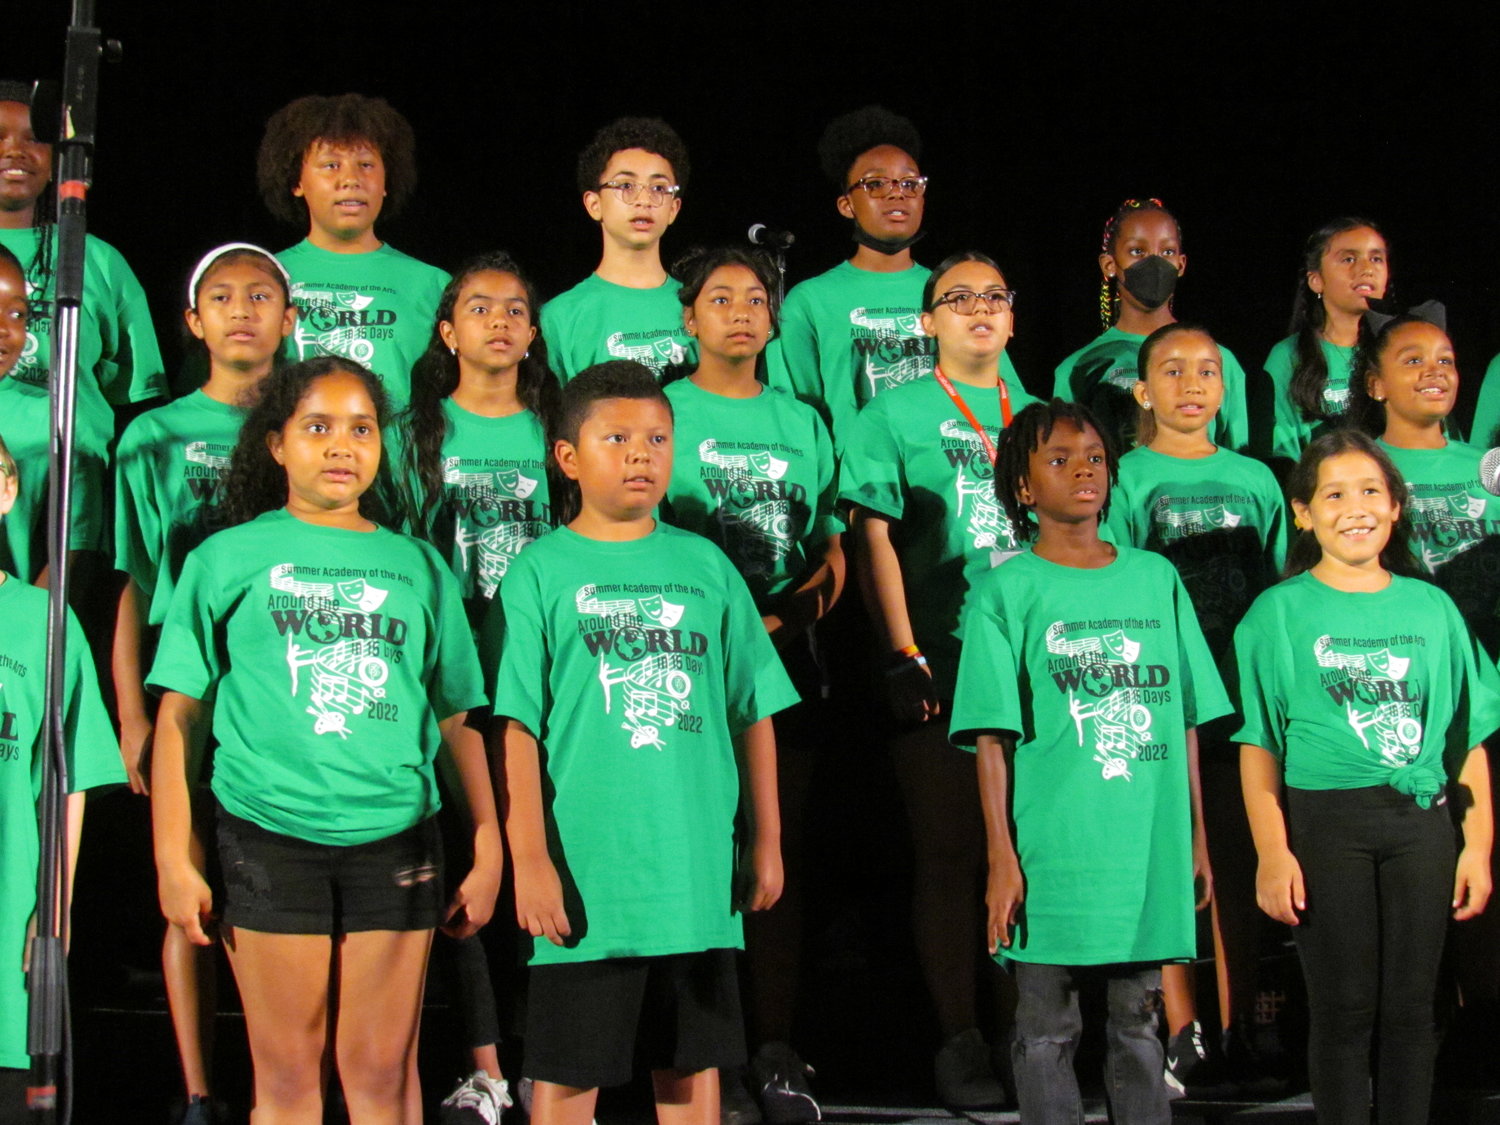 "Around the World in 15 Days" served as the theme of this year's Summer Academy of the Performing Arts.